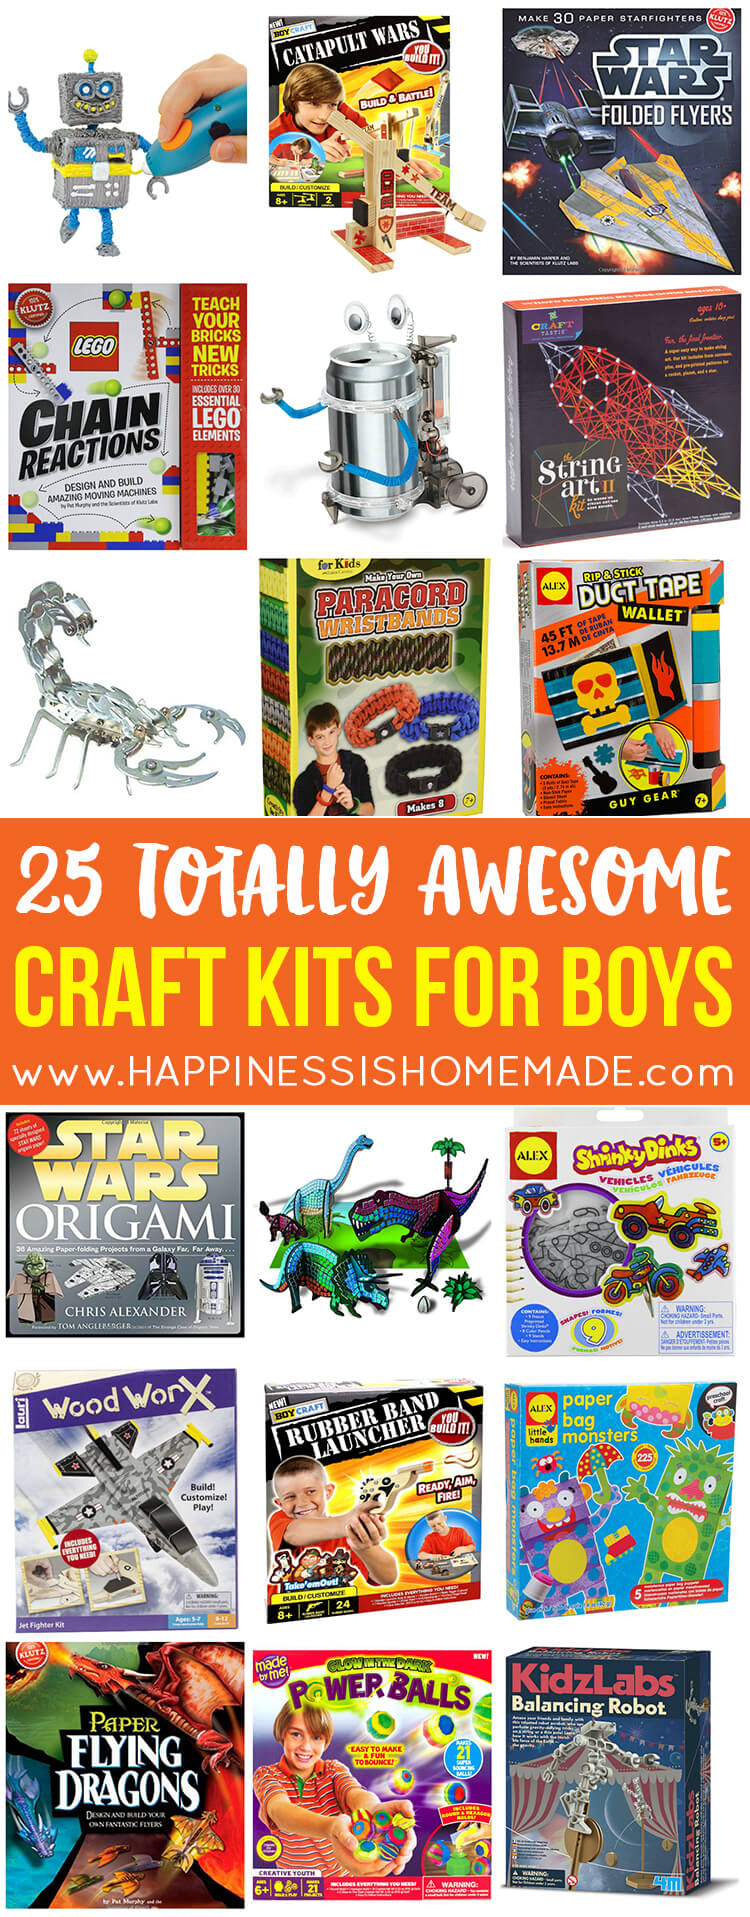 https://www.happinessishomemade.net/wp-content/uploads/2016/10/25-Awesome-Craft-Kits-for-Boys.jpg